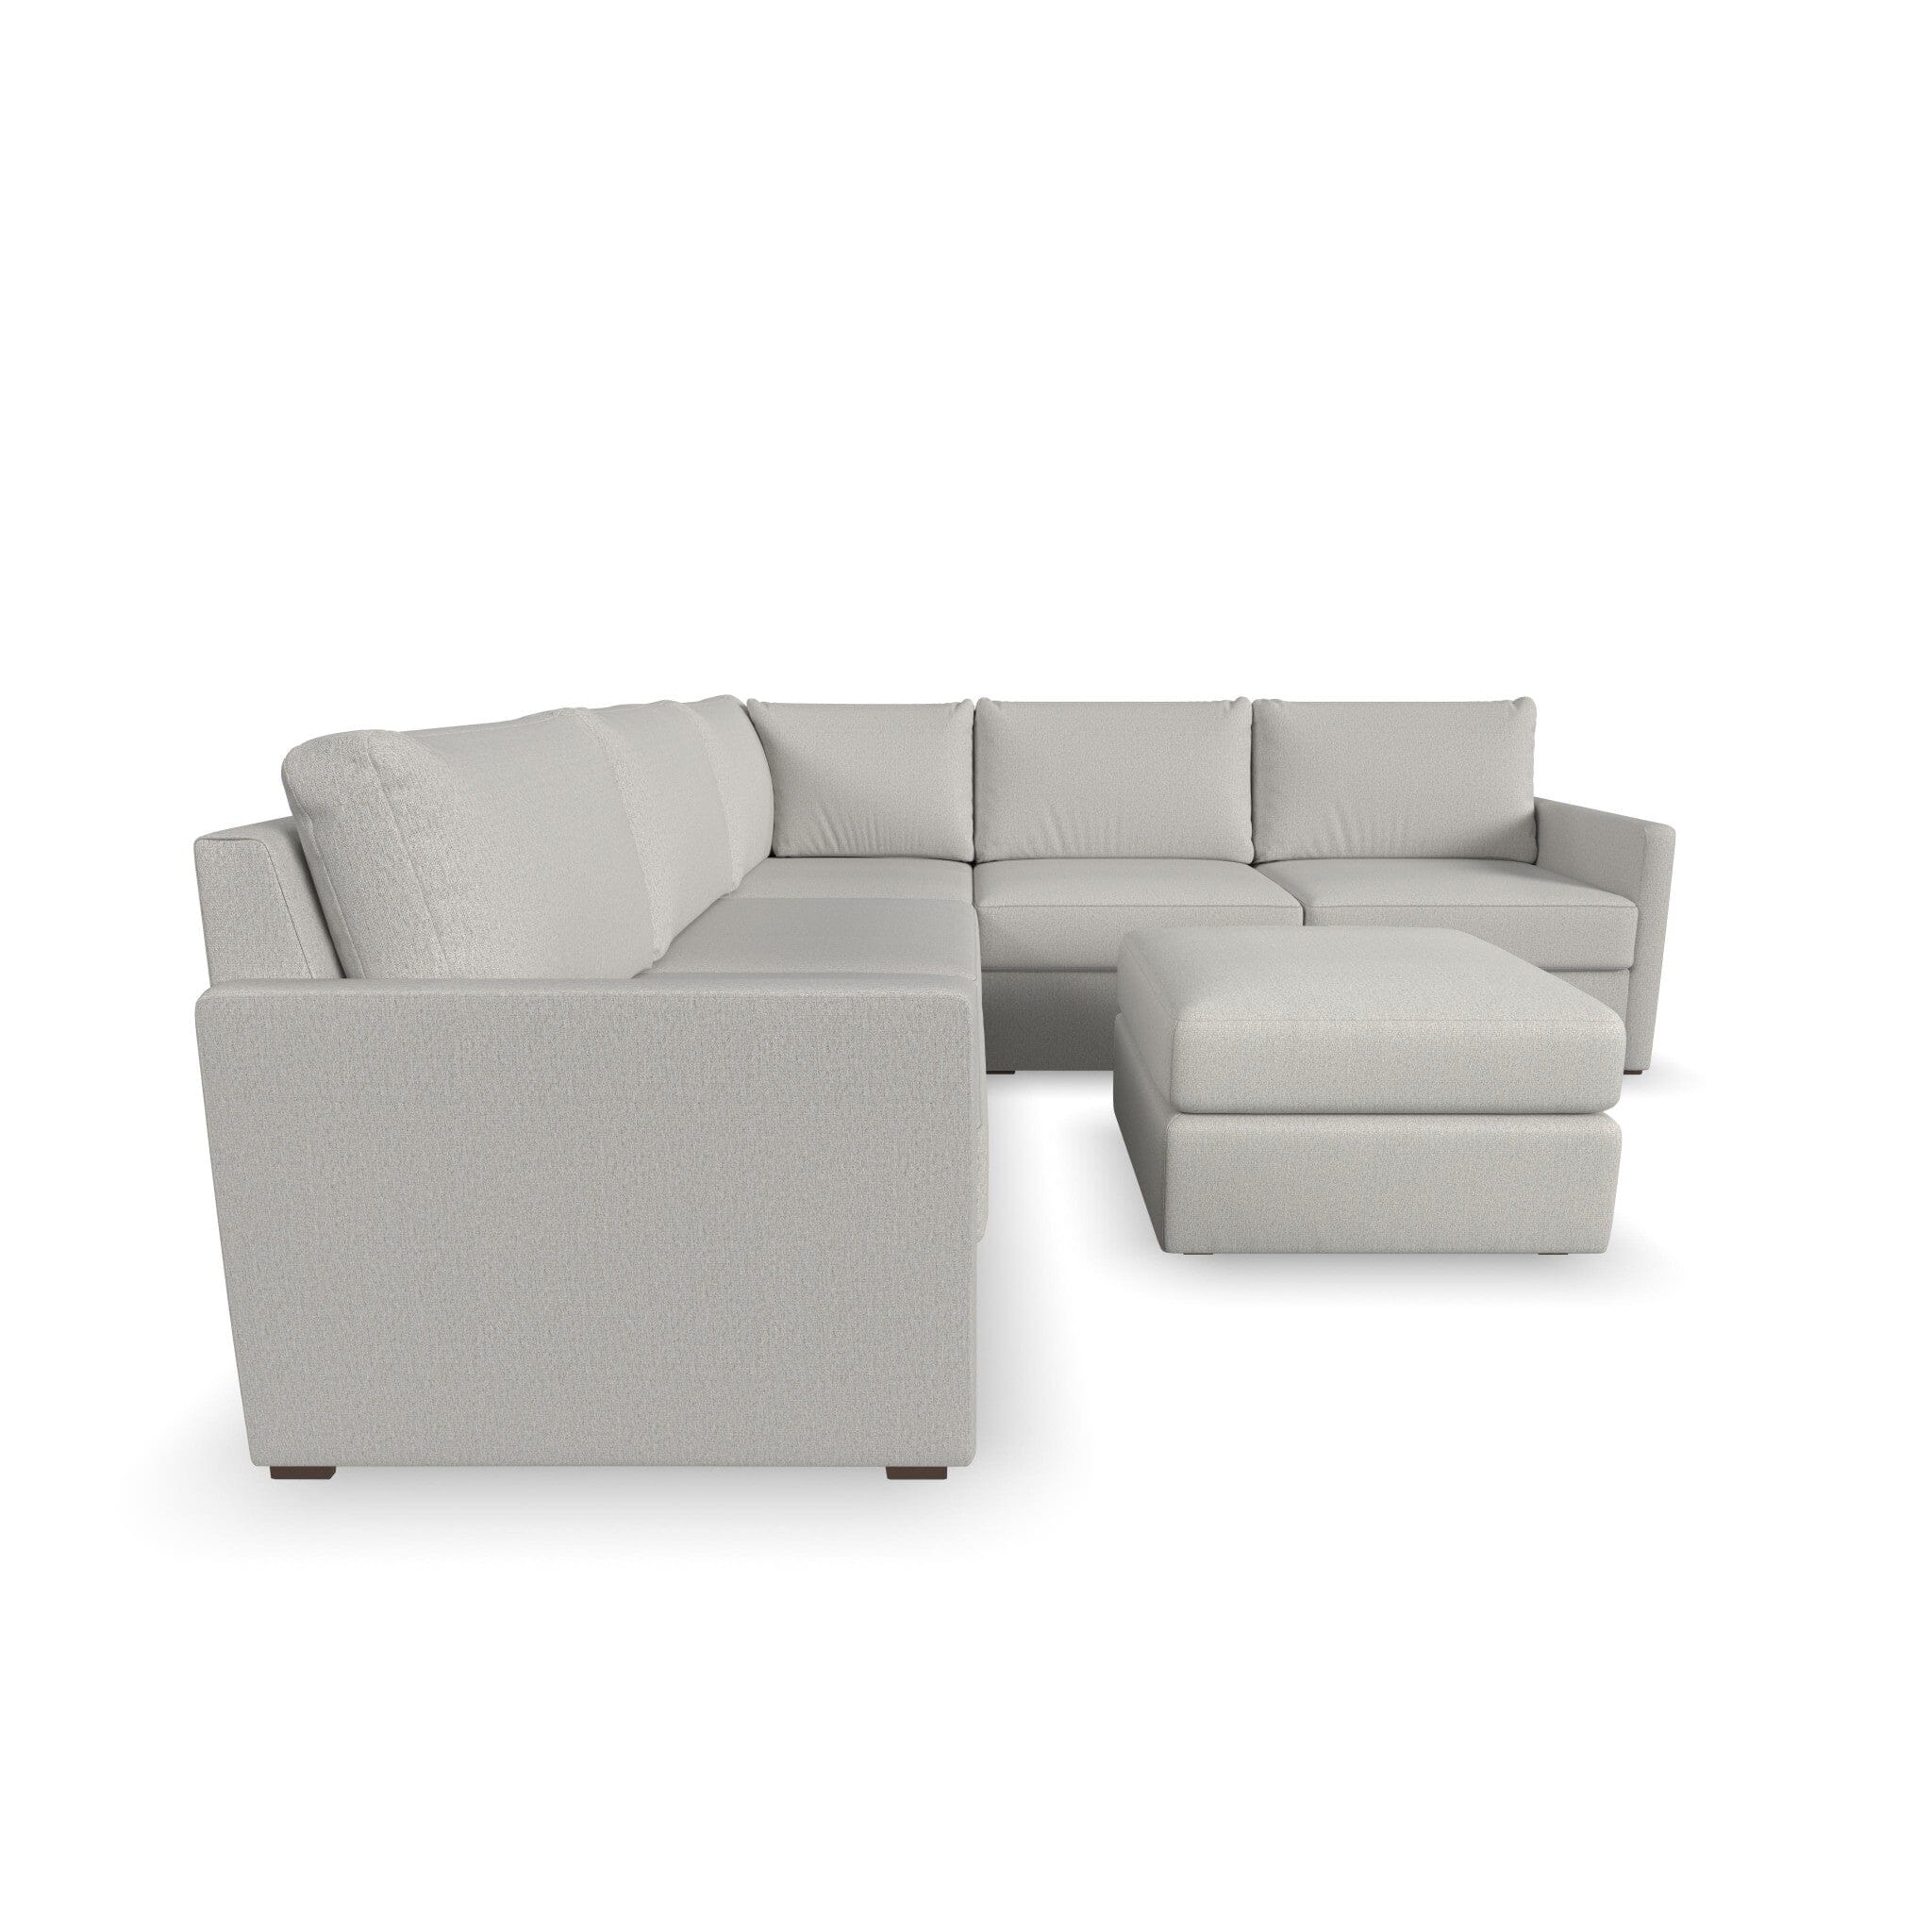 Traditional 5-Seat Sectional with Narrow Arm and Ottoman By Flex Sectional Flex